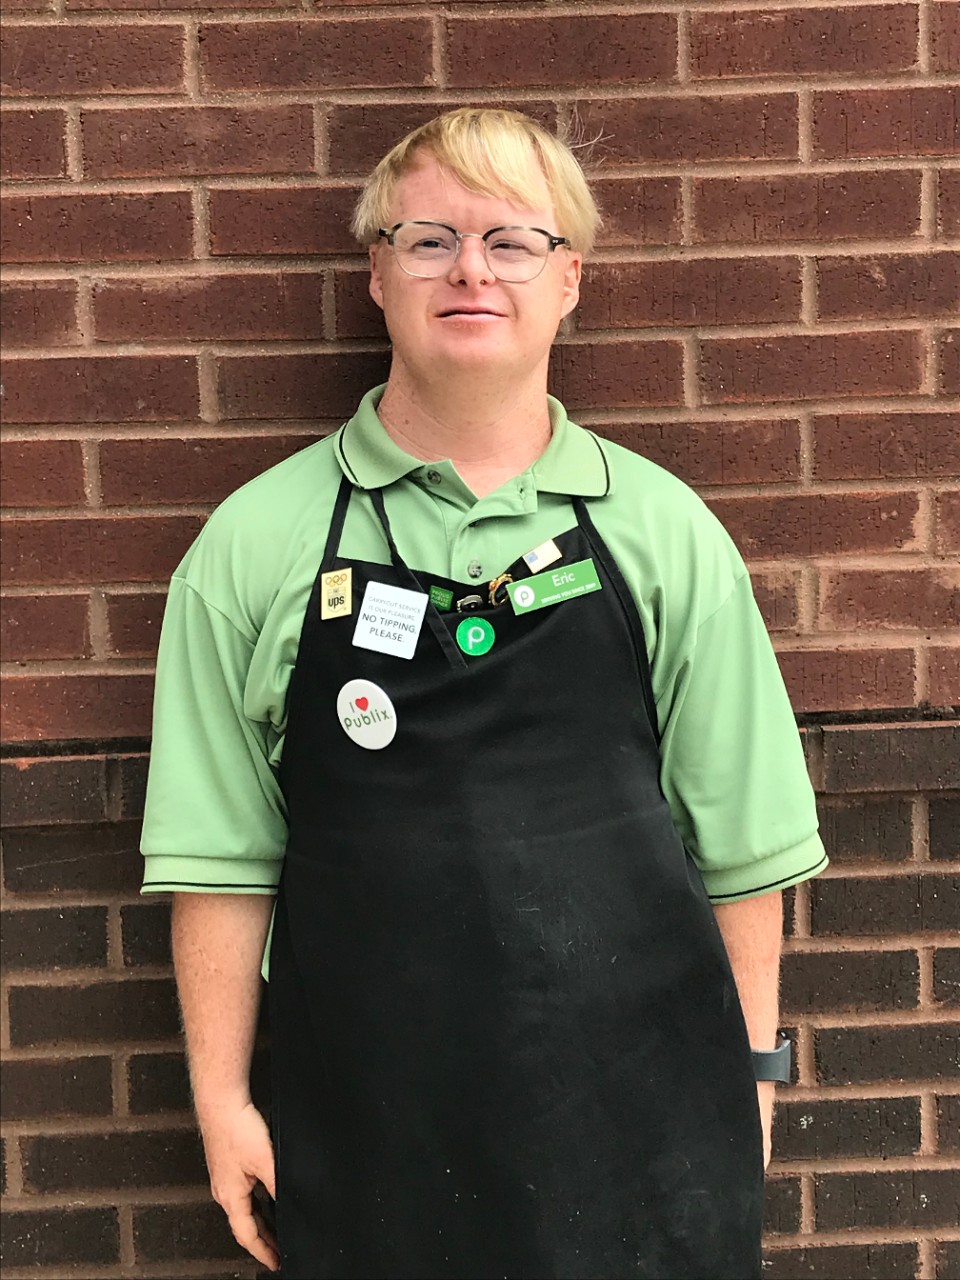 Eric, a young blonde man with Down syndrome and glasses, is wearing his Publix apron and polo shirt standing against a brick wall and smiling